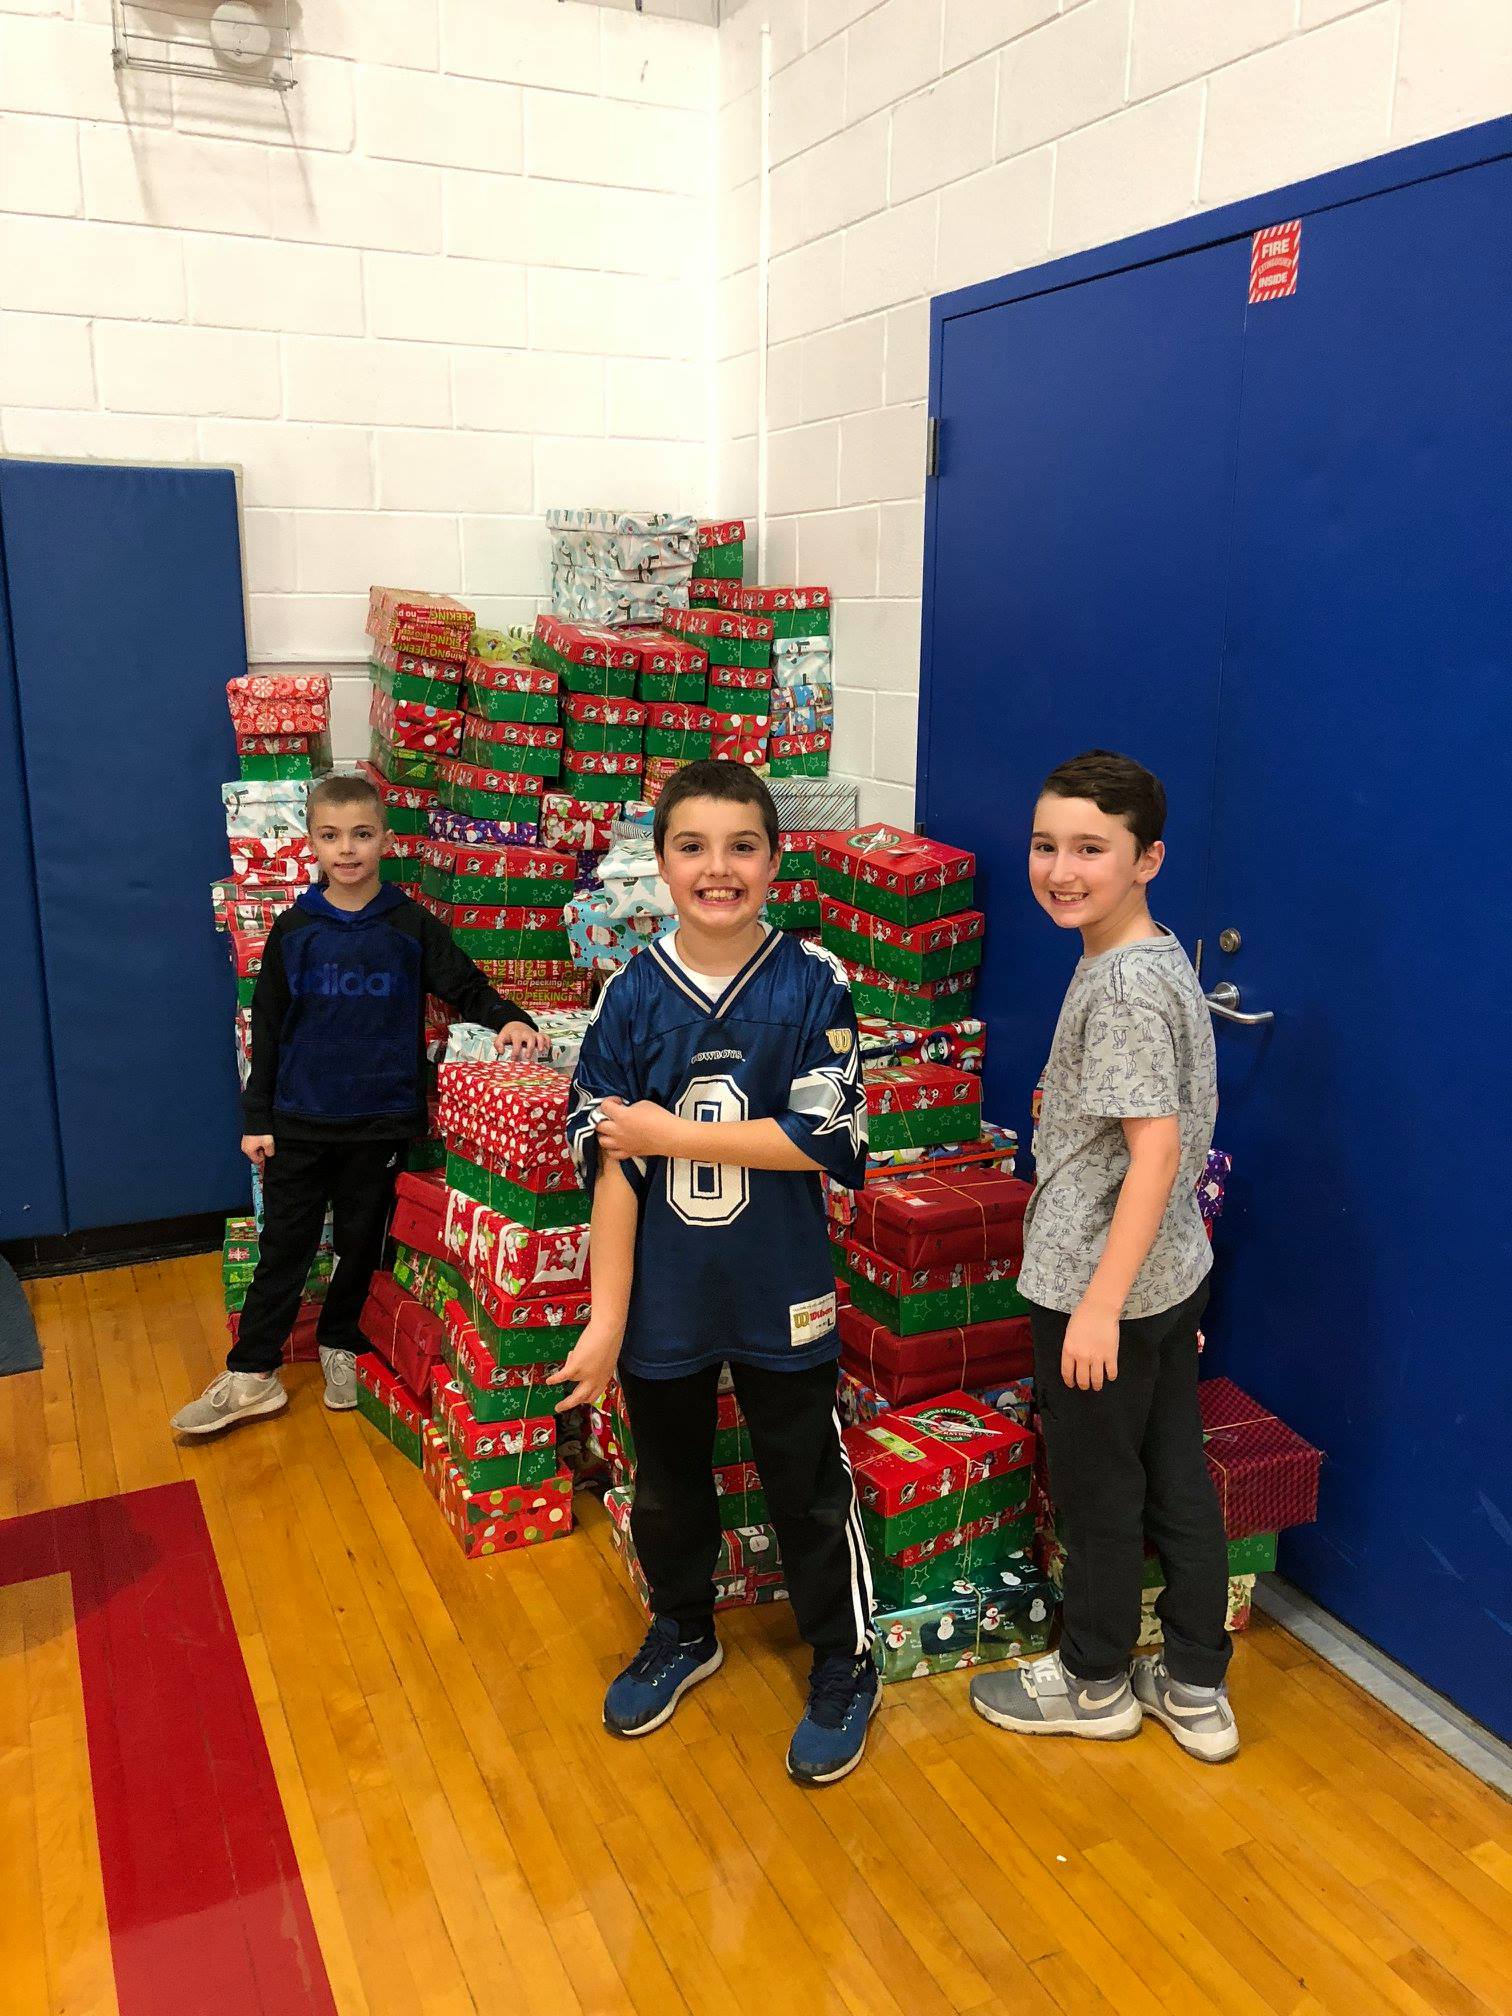 Operation Shoe Box Event - Three Children in front of a large pile of wrapped shoeboxes